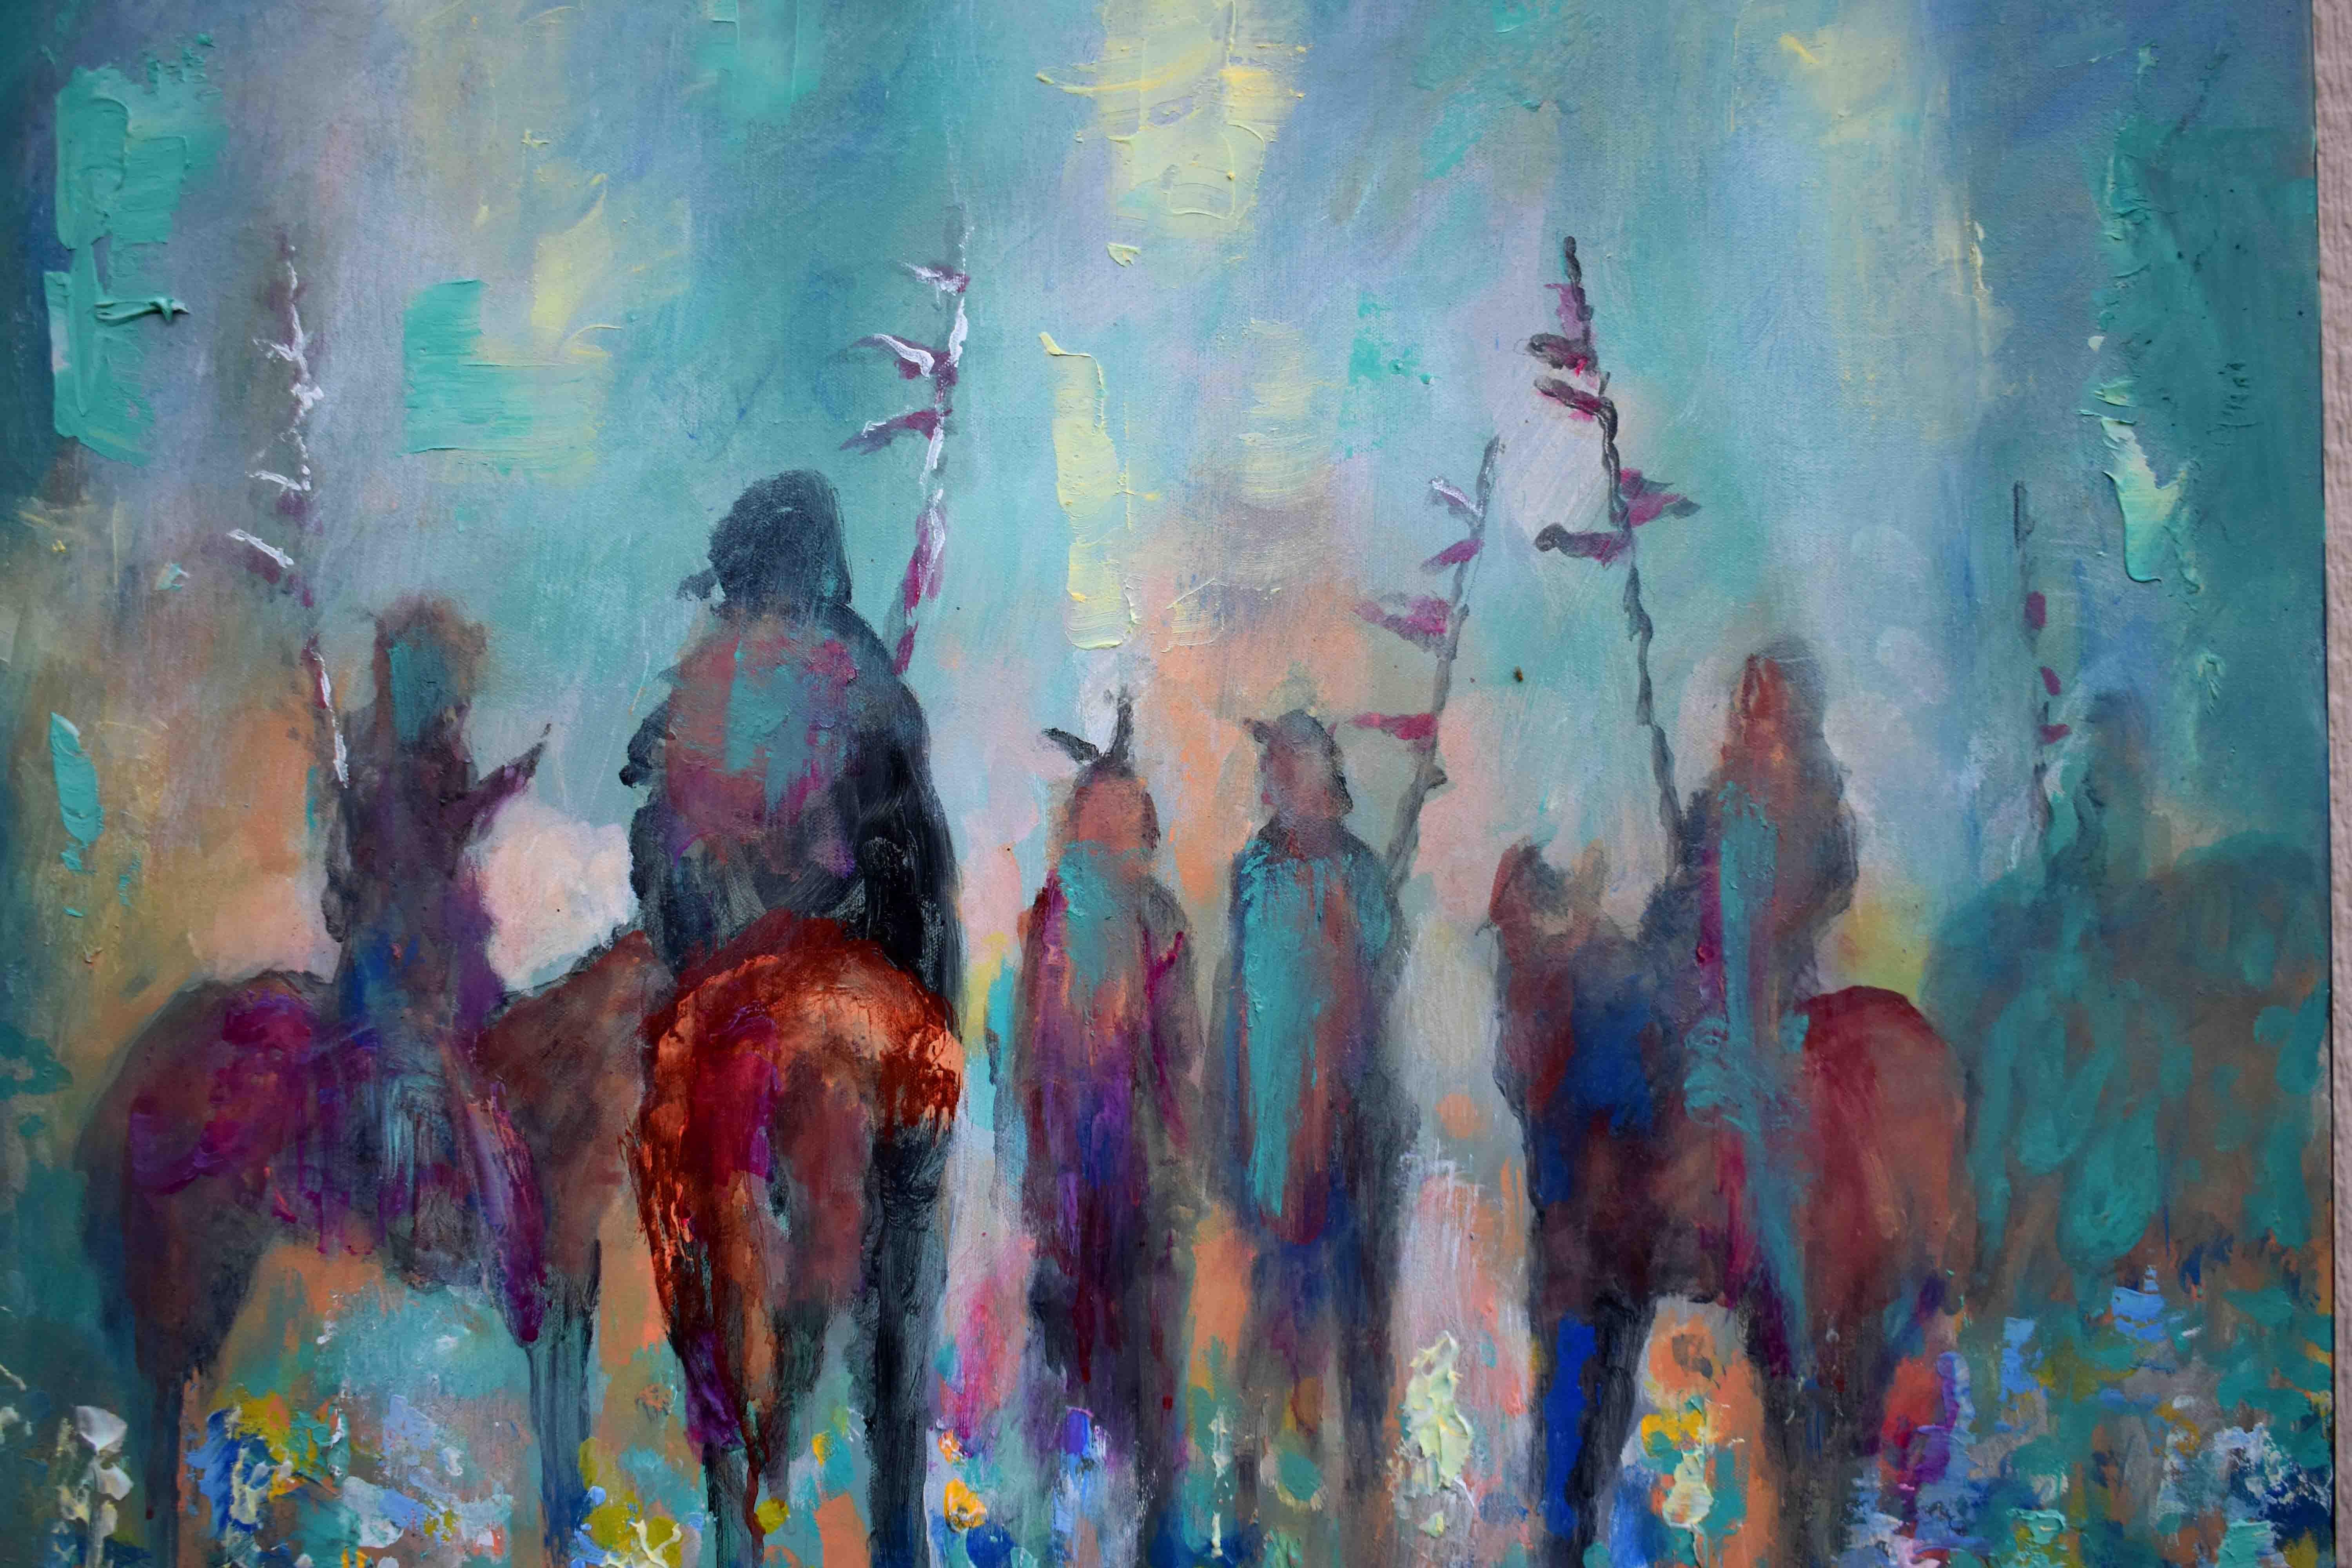 <p>Artist Comments<br>Silhouettes of a group of Native Americans come together in artist Kip Decker's primitive painting. The figures gather and decide upon a common matter. Kip uses moody shades of blue to depict the dramatic scene. Free-hand